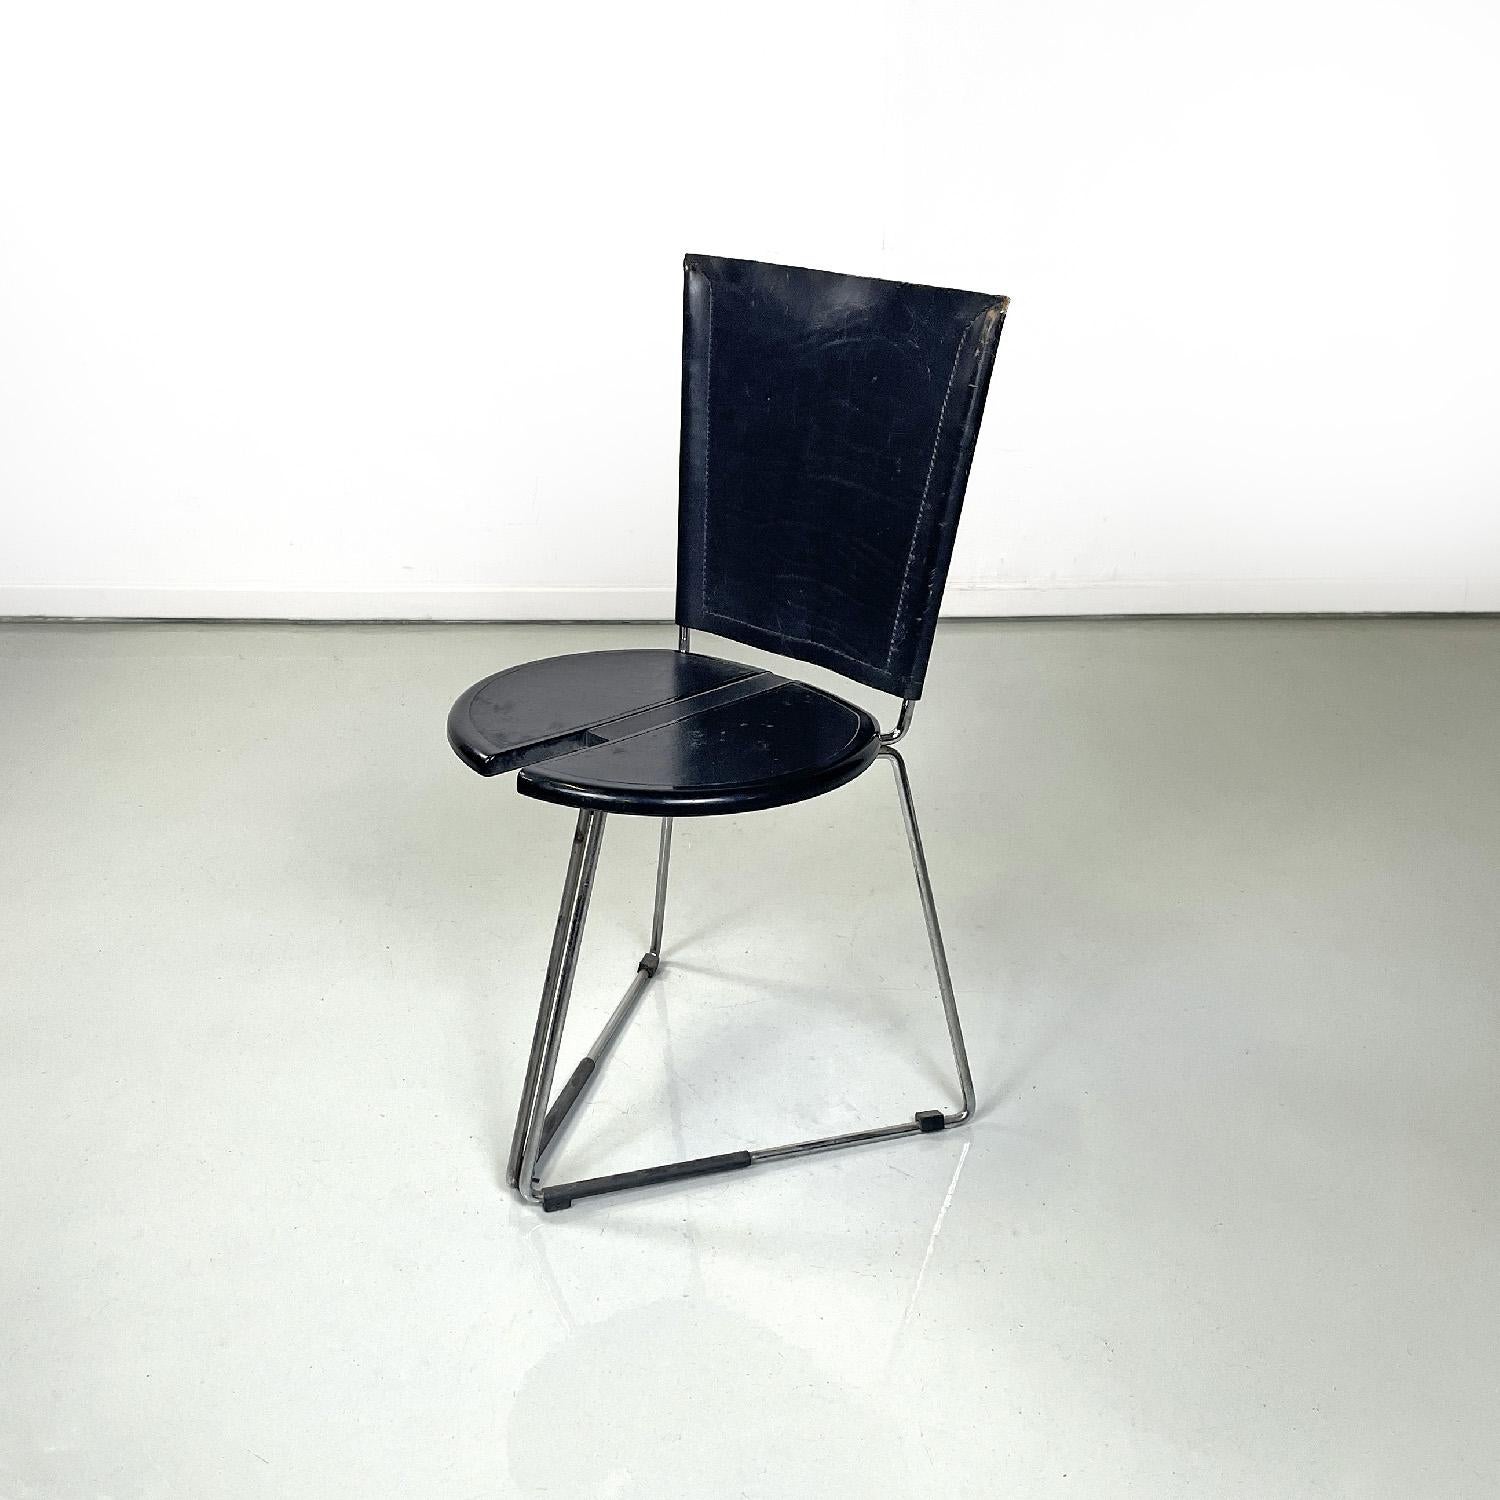 Italian modern black chair Terna by Gaspare Cairoli for Seccose, 1980s
Chair mod. Terna with triangular base. The seat is round and is made of black plastic with two semicircular parts covered in black leather and has a recess. The backrest is in